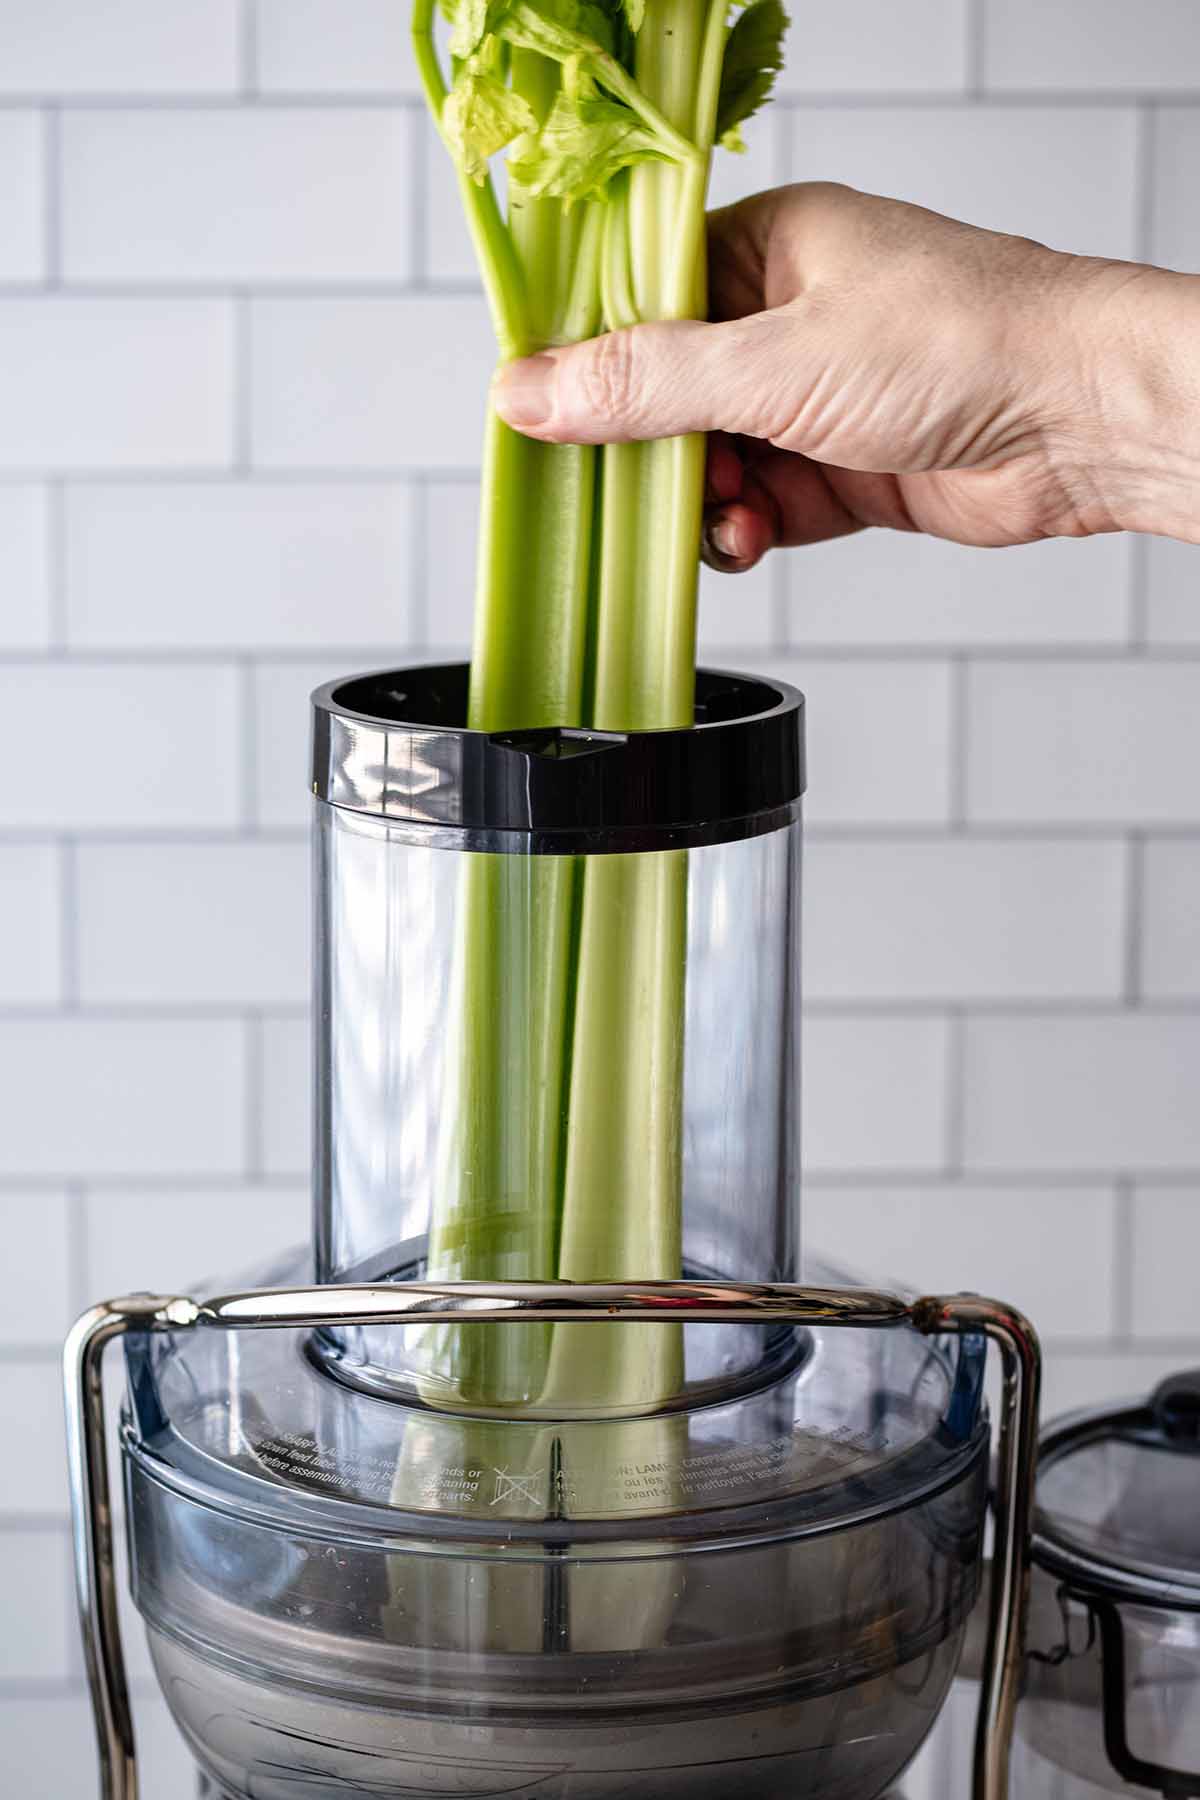 Celery stalks being added to the chute of a juice extractor.